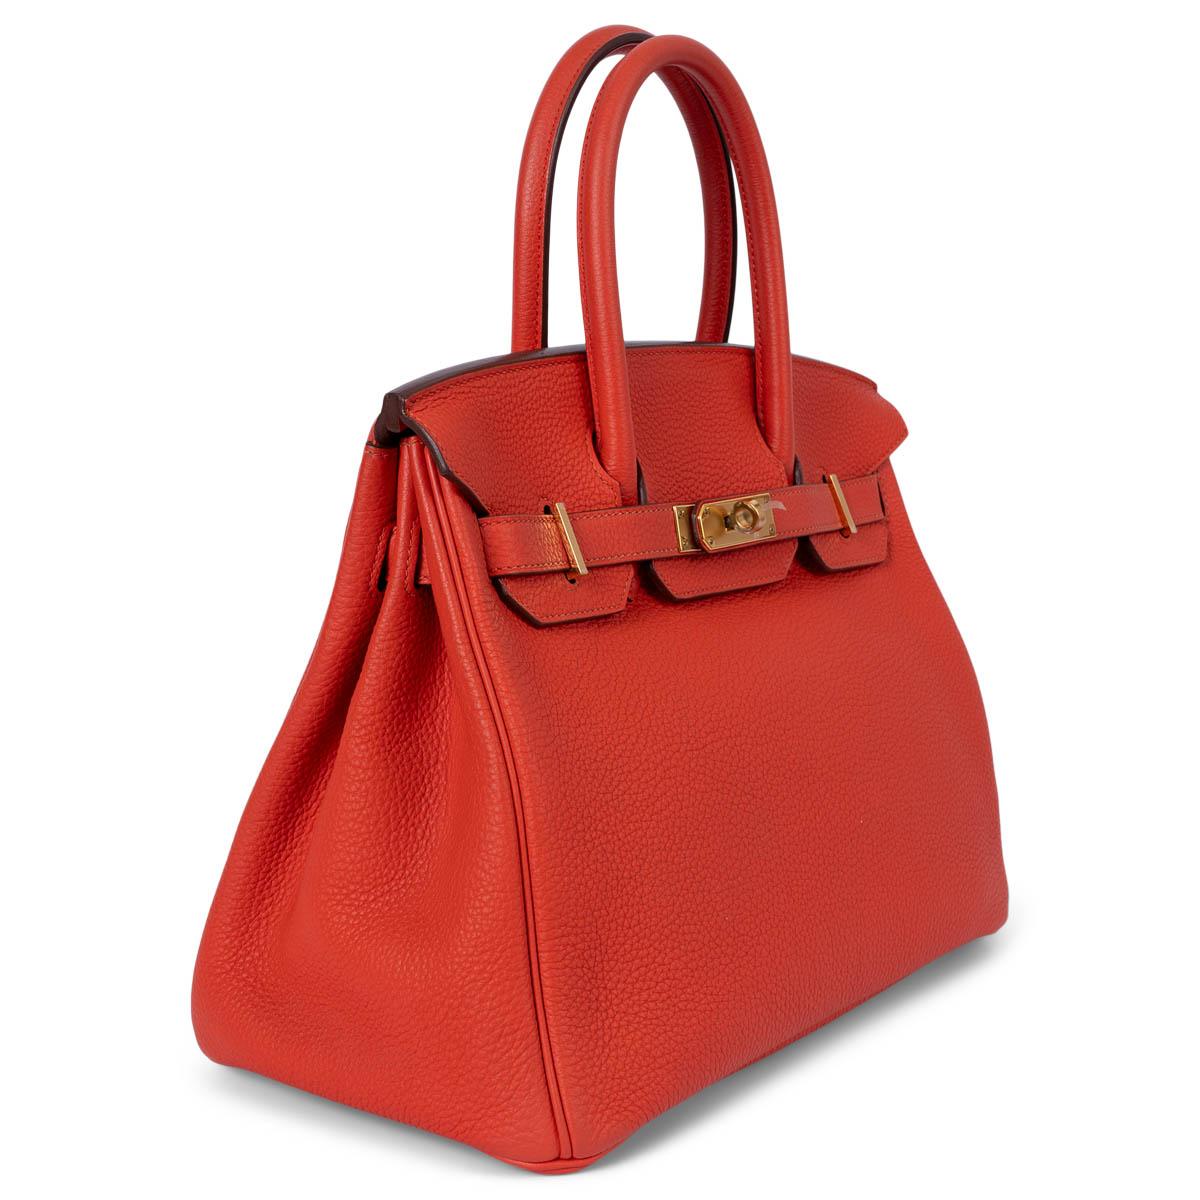 100% authentic Hermès Birkin 30 bag in Capucine orange Togo leather with gold-plated hardware. Lined in Chevre (goat skin) with an open pocket against the front and a zipper pocket against the back. Has been carried once or twice and is in virtually